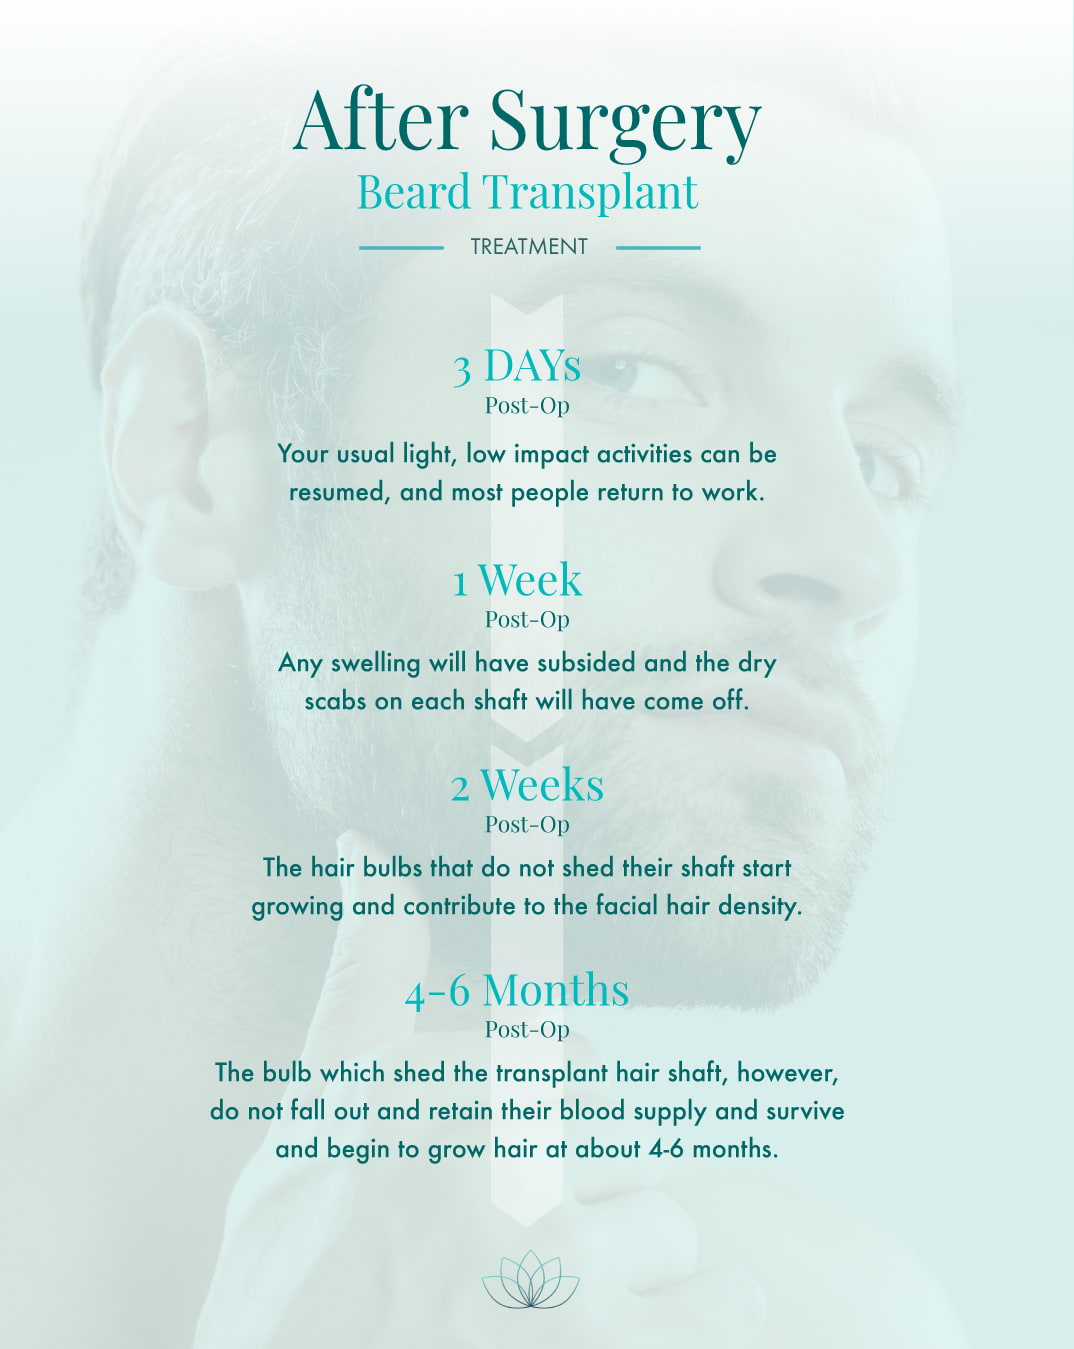 Beard Transplant Treatment infographic outlines critical recovery phases at 3 days, 1 week, 2 weeks, and 4-6 months post-operation, describing the resumption of activities, the subsiding of swelling, the hair growth process, and the expected time for hair to start growing post-transplant.